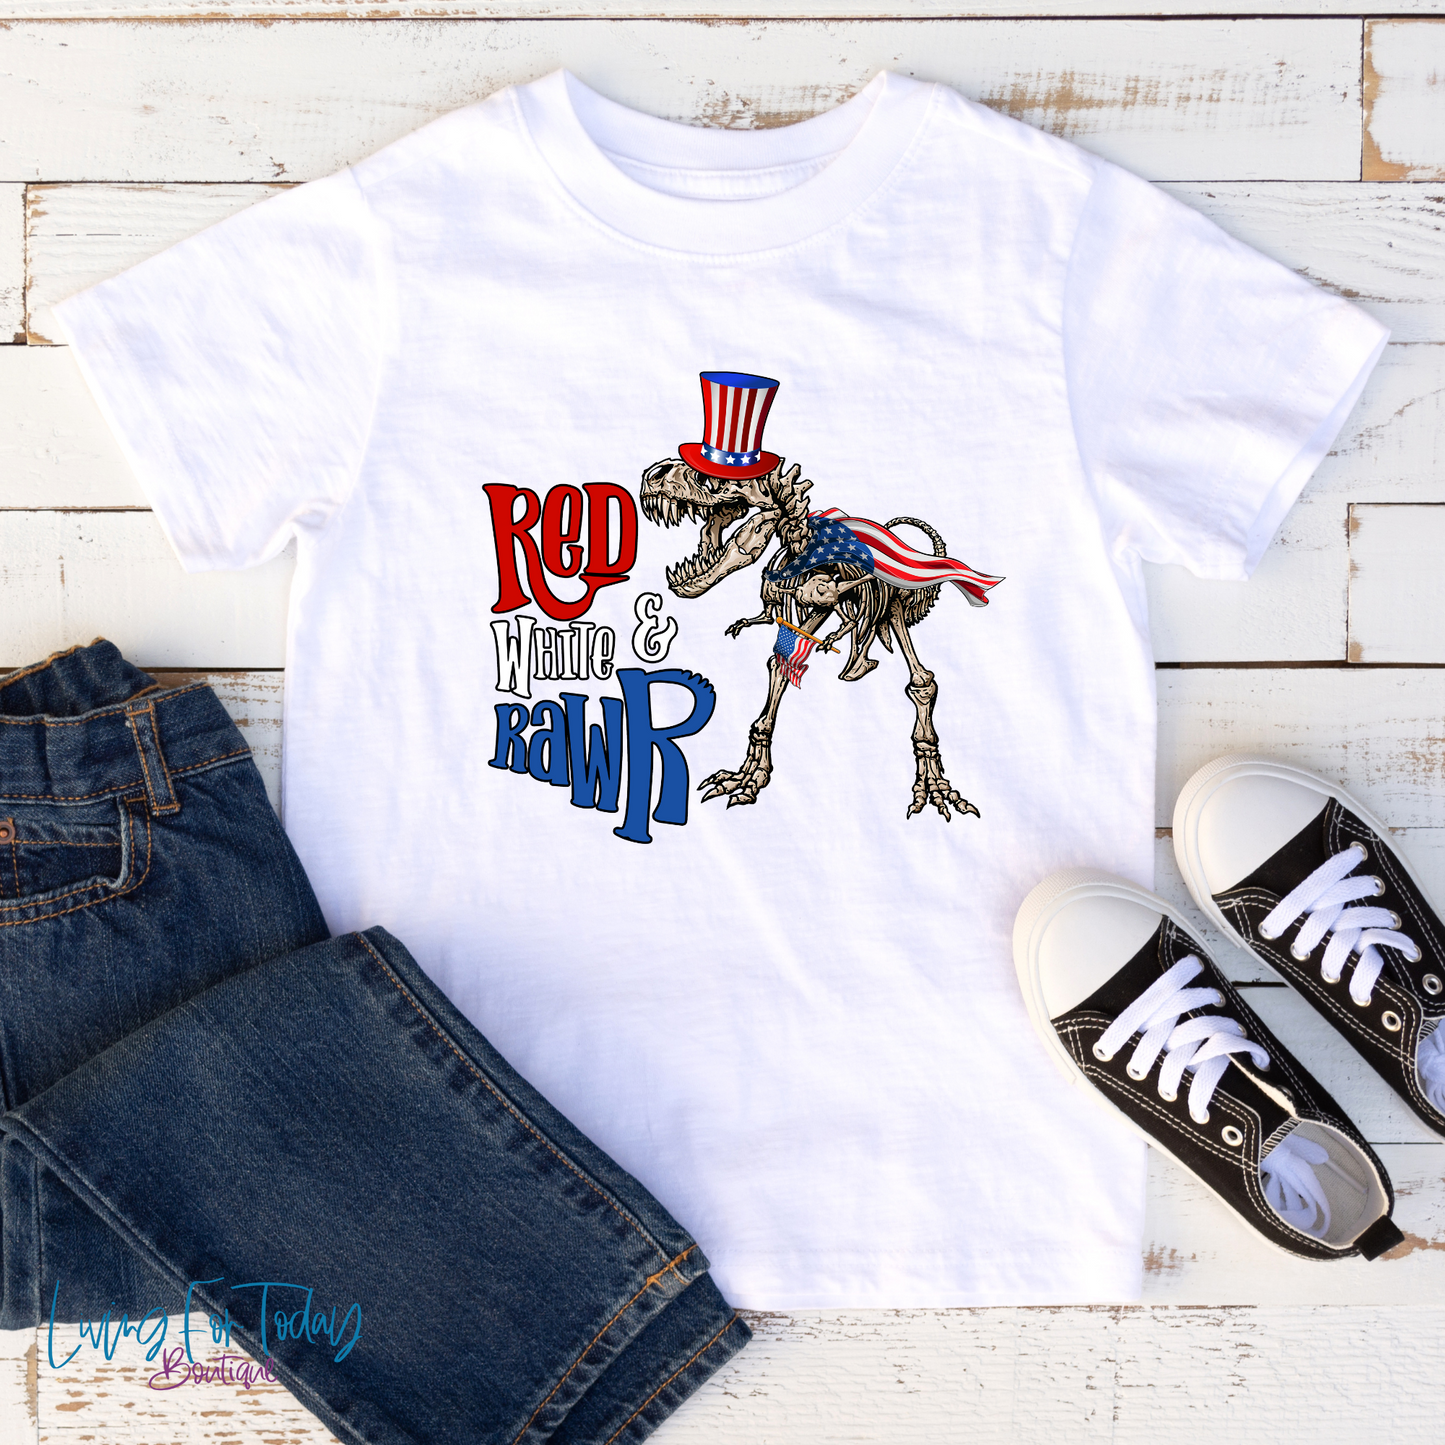 Red, White, & Rawr Graphic Tee